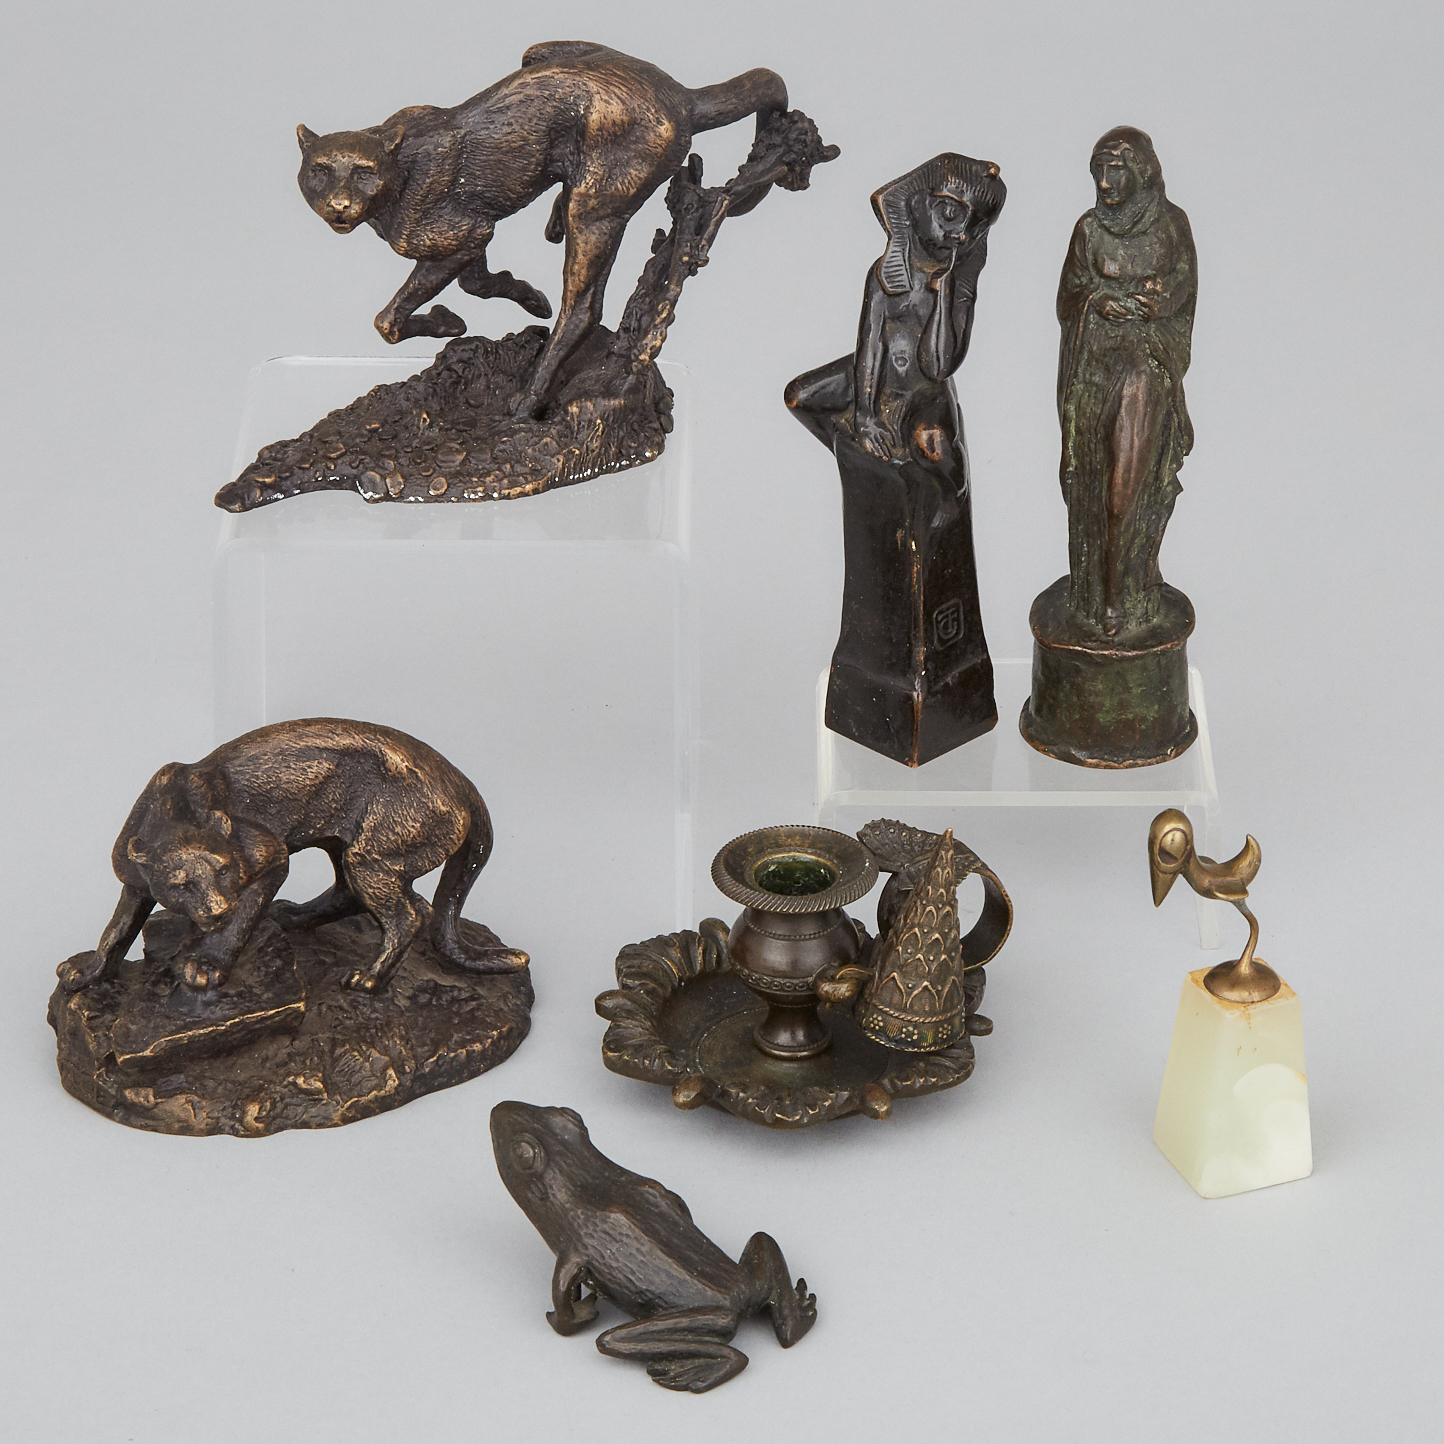 Miscellaneous Collection of Small Continental Bronzes, early-mid 20th century